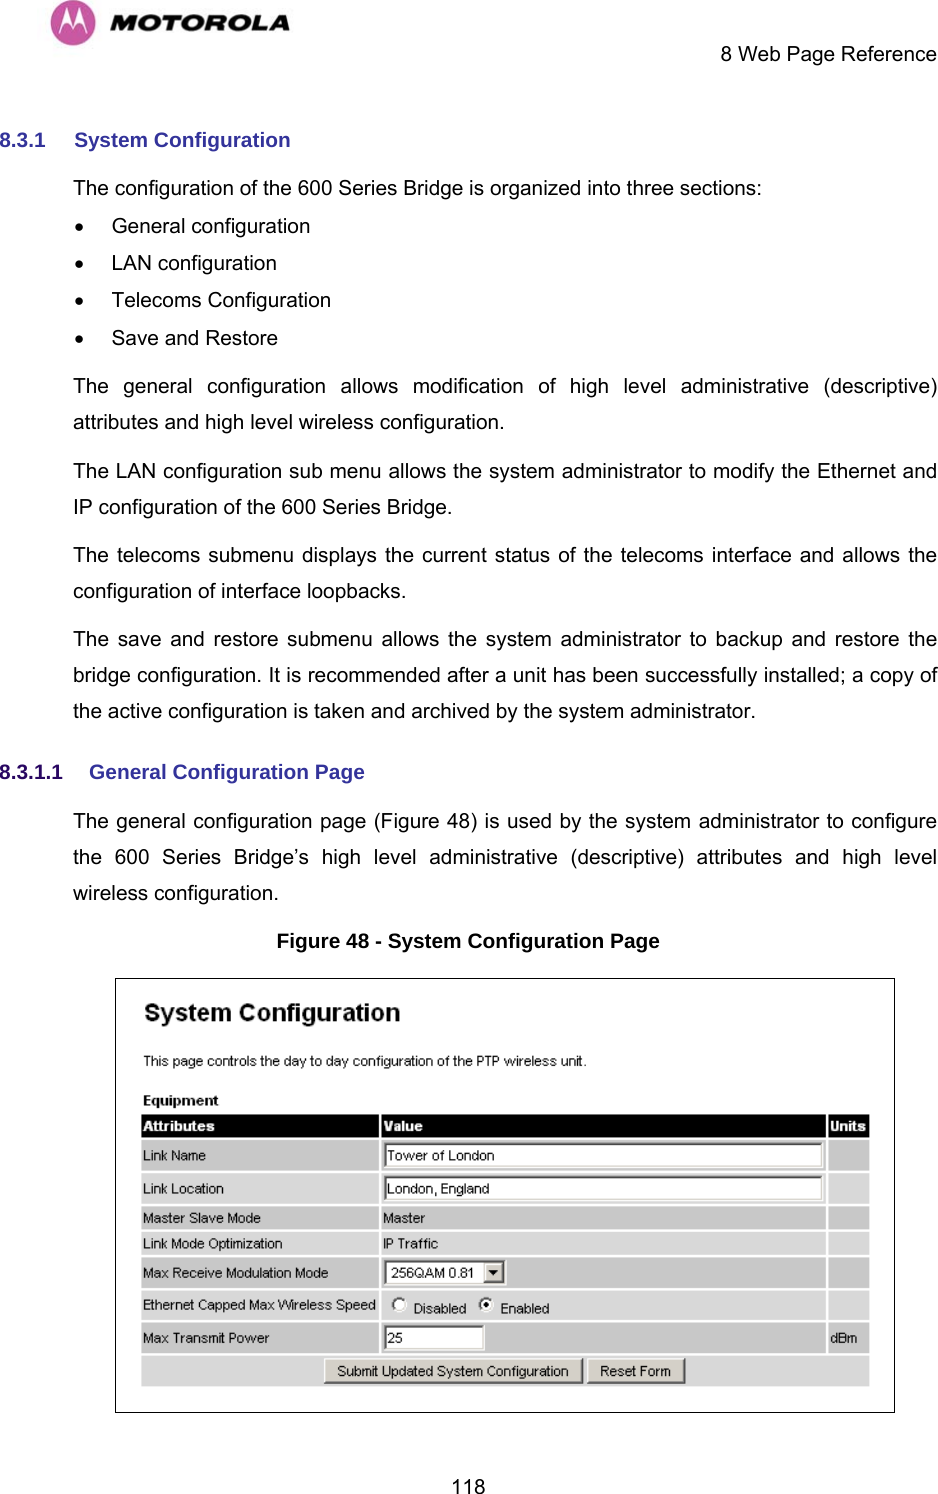     8 Web Page Reference  1188.3.1  System Configuration The configuration of the 600 Series Bridge is organized into three sections: • General configuration • LAN configuration • Telecoms Configuration •  Save and Restore The general configuration allows modification of high level administrative (descriptive) attributes and high level wireless configuration. The LAN configuration sub menu allows the system administrator to modify the Ethernet and IP configuration of the 600 Series Bridge.  The telecoms submenu displays the current status of the telecoms interface and allows the configuration of interface loopbacks. The save and restore submenu allows the system administrator to backup and restore the bridge configuration. It is recommended after a unit has been successfully installed; a copy of the active configuration is taken and archived by the system administrator. 8.3.1.1  General Configuration Page  The general configuration page (Figure 48) is used by the system administrator to configure the 600 Series Bridge’s high level administrative (descriptive) attributes and high level wireless configuration. Figure 48 - System Configuration Page  